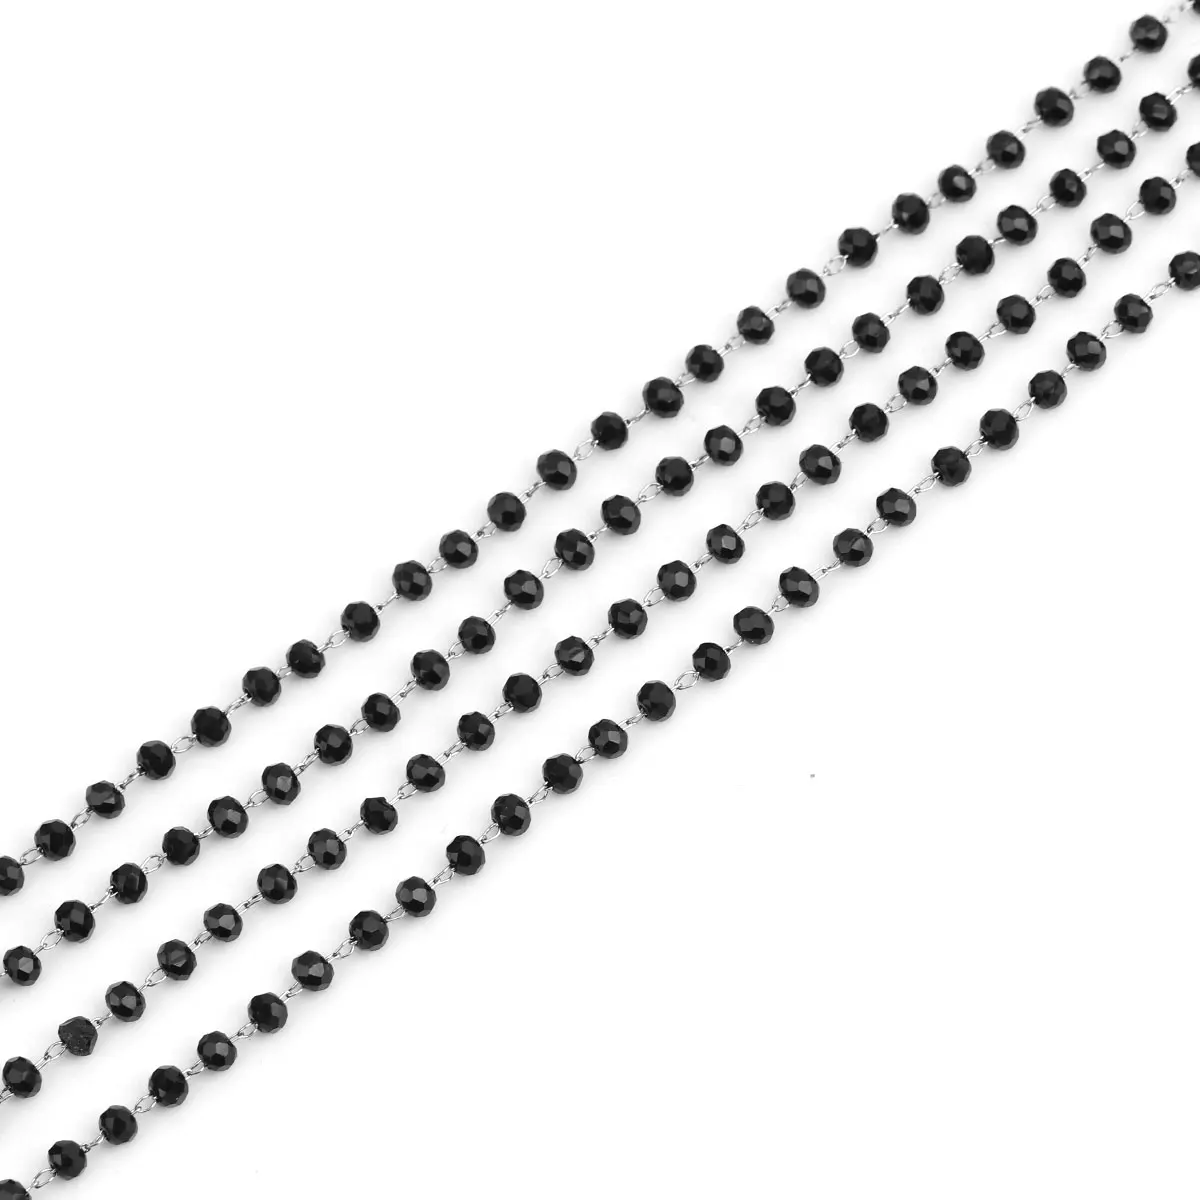 304 Stainless Steel Black Crystal Glass Beads Chain Link Cable Chain Silver Color For DIY Bracelet Jewelry Making 3.4x2.9mm, 1 M